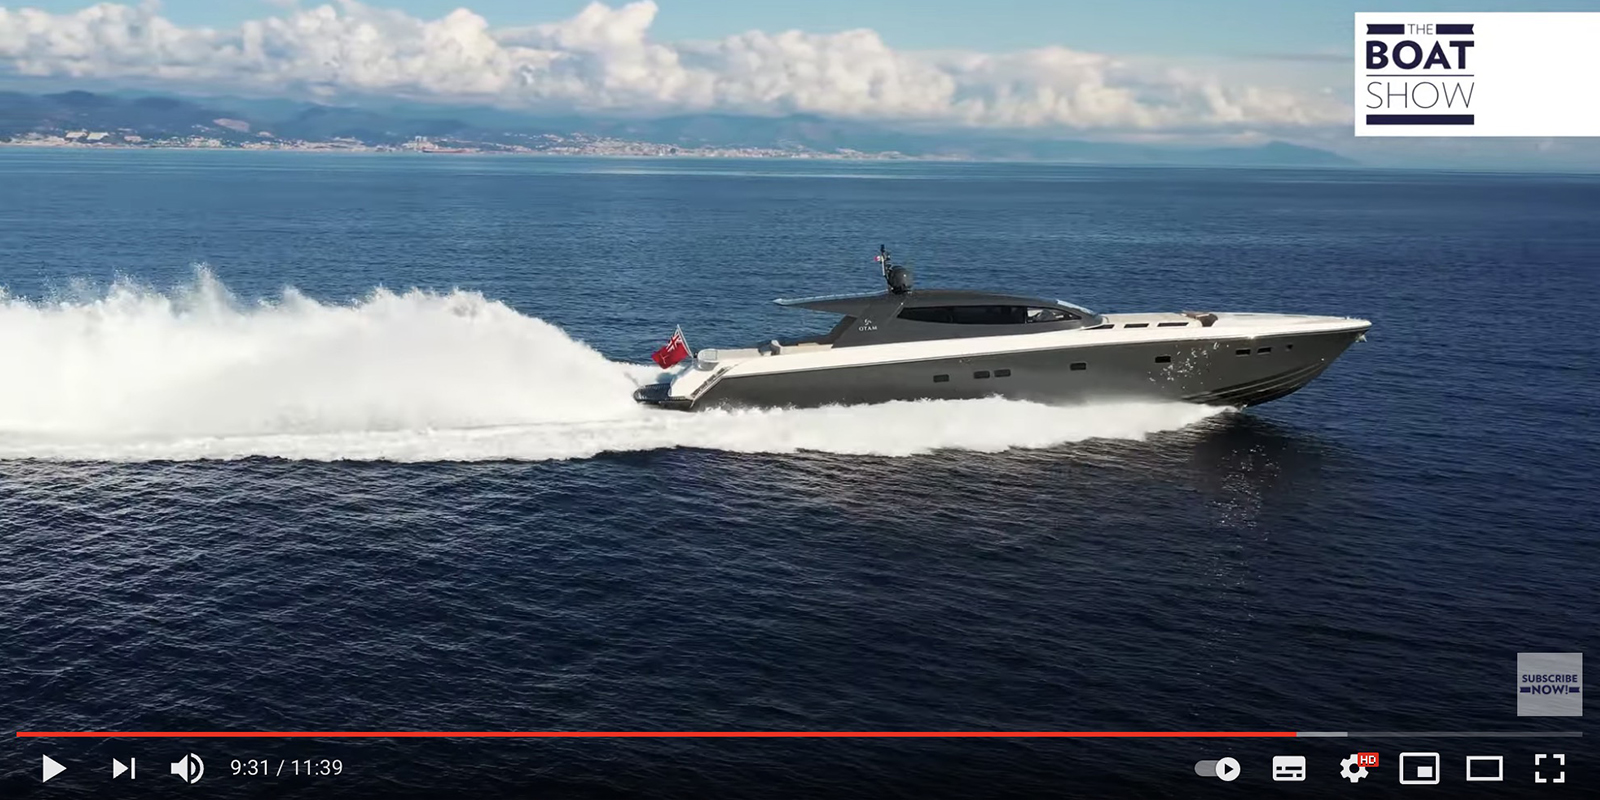 NEW FEATURES - OTAM 80 HT - Performance Motor Yacht Exclusive Review - The Boat Show